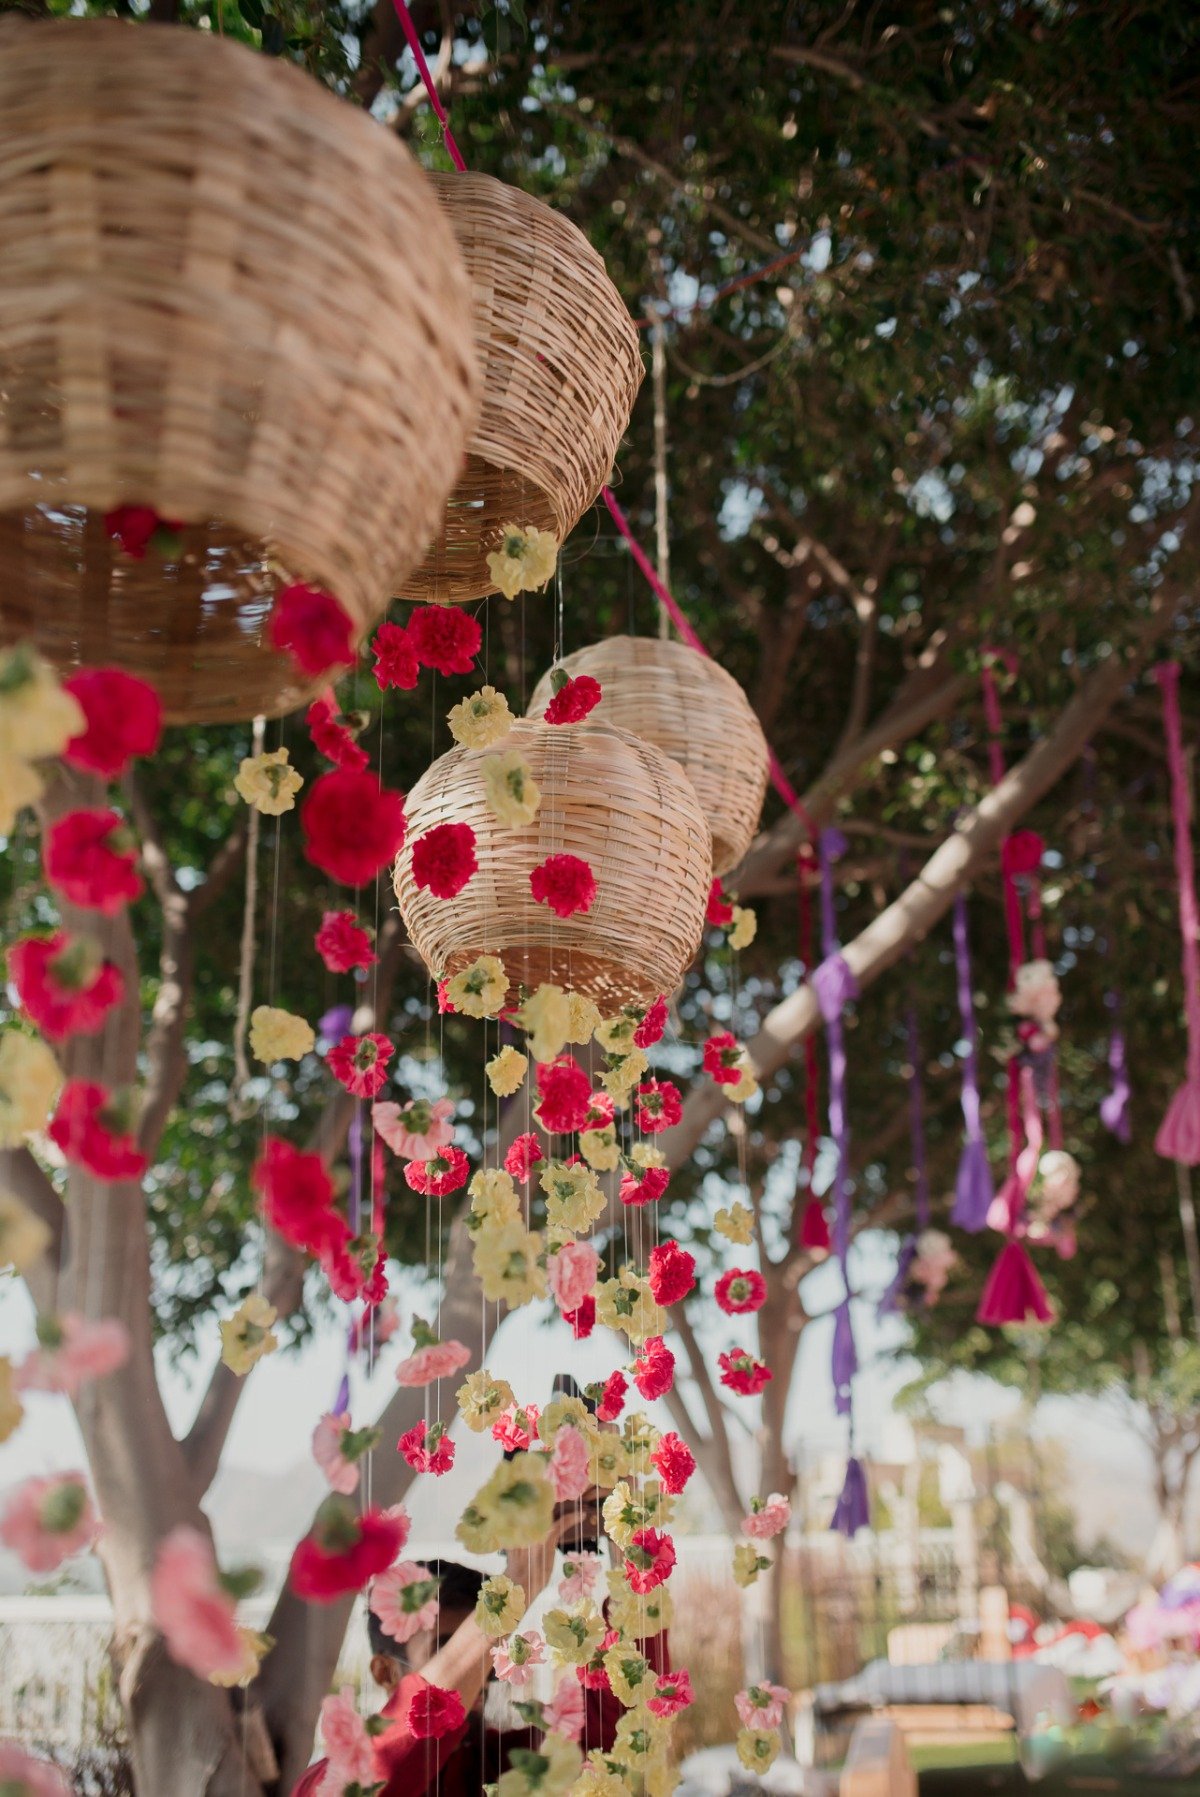 wicker baskets with florals hanging from them